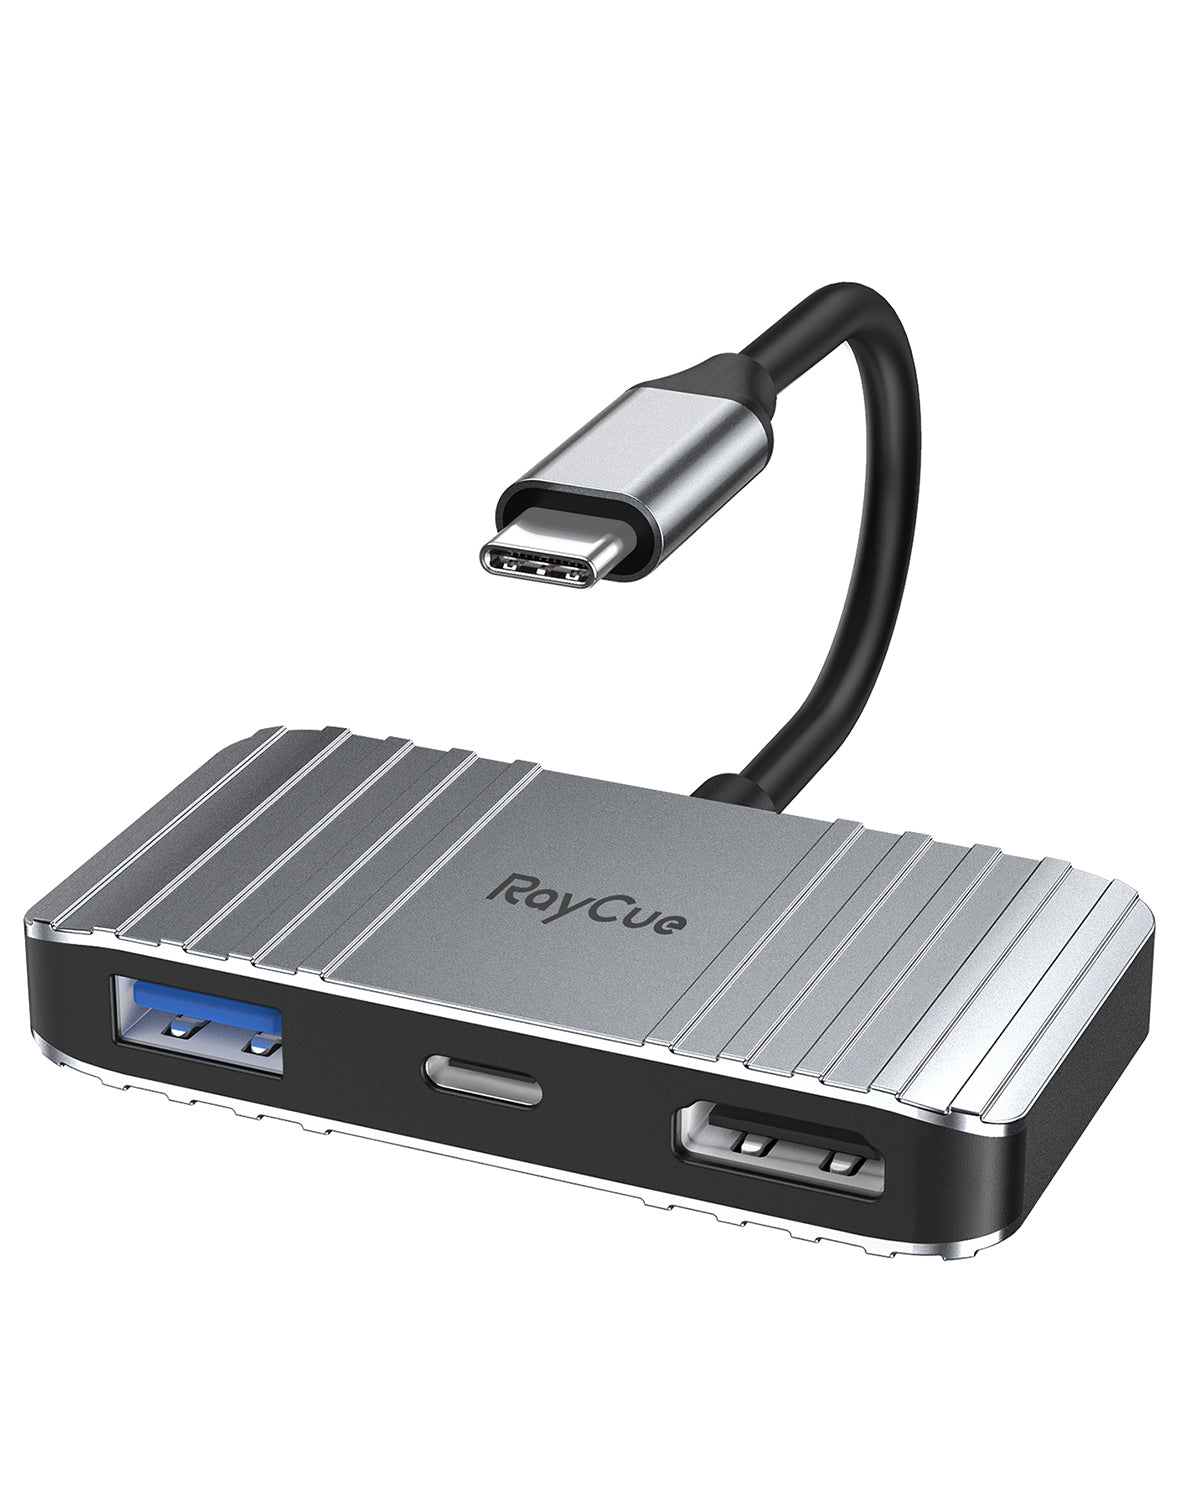 RayCue ExpandPro Ace 3-in-1 USB-C Multimedia Hub Adapter